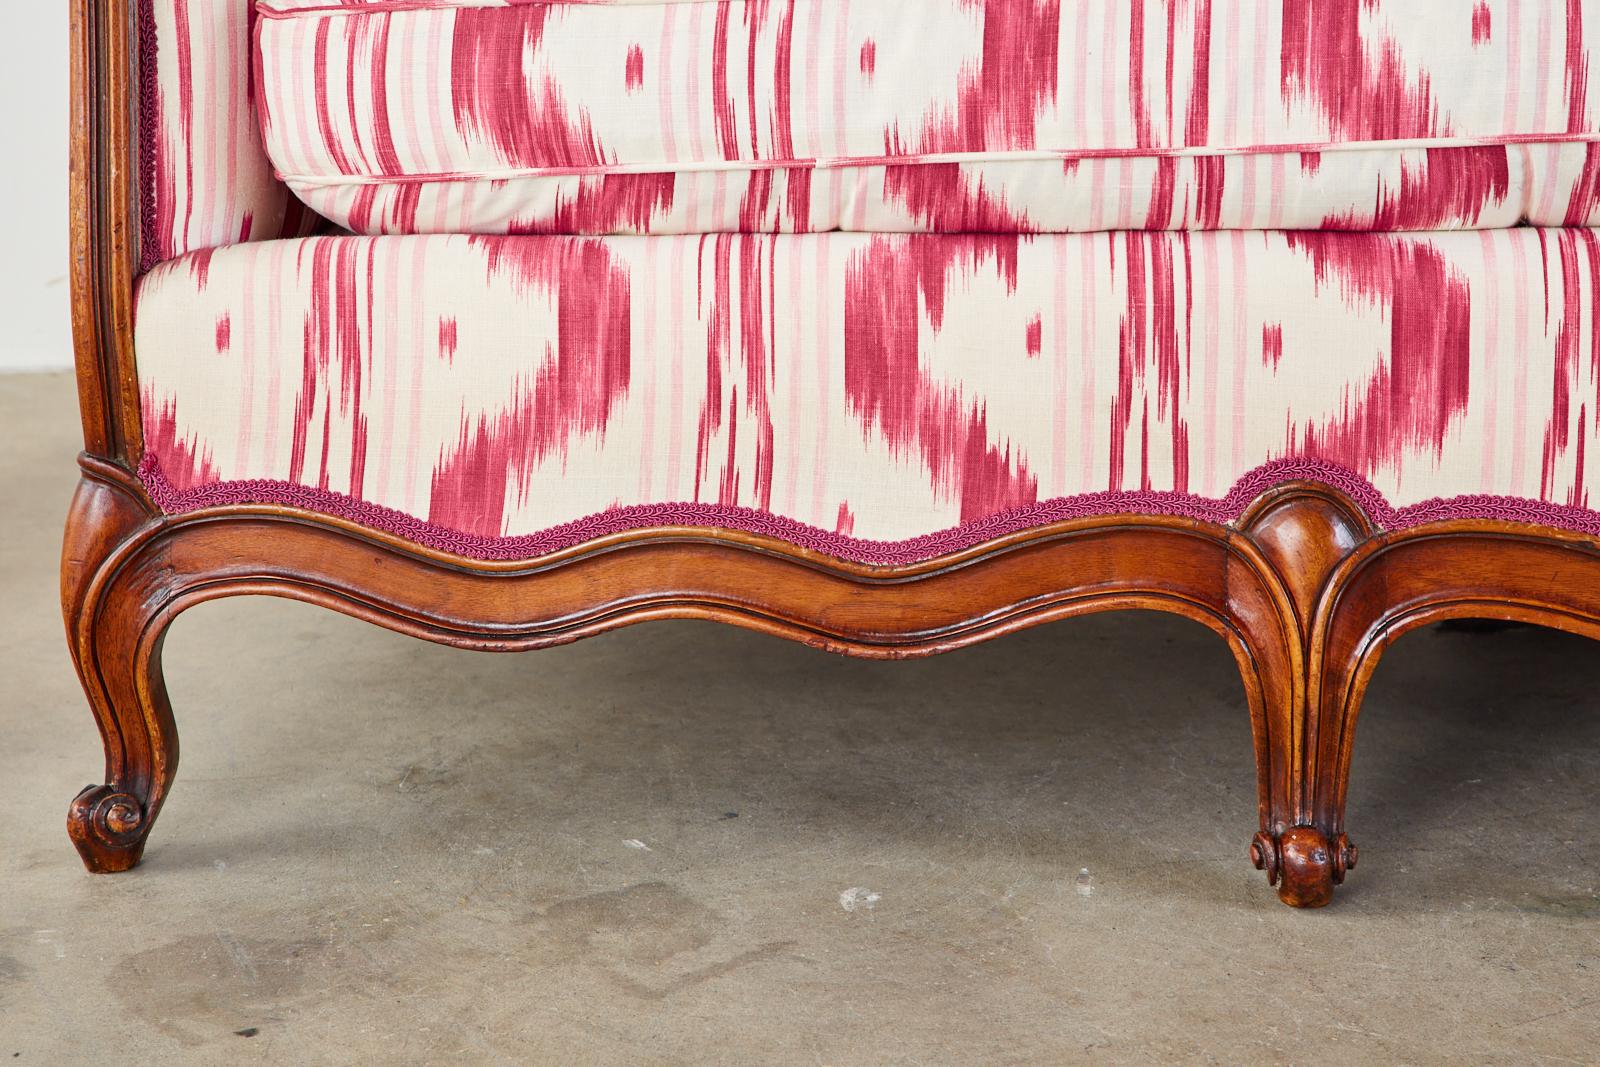 French Provincial Serpentine Canape Settee Pierre Frey Toile Ikat 6